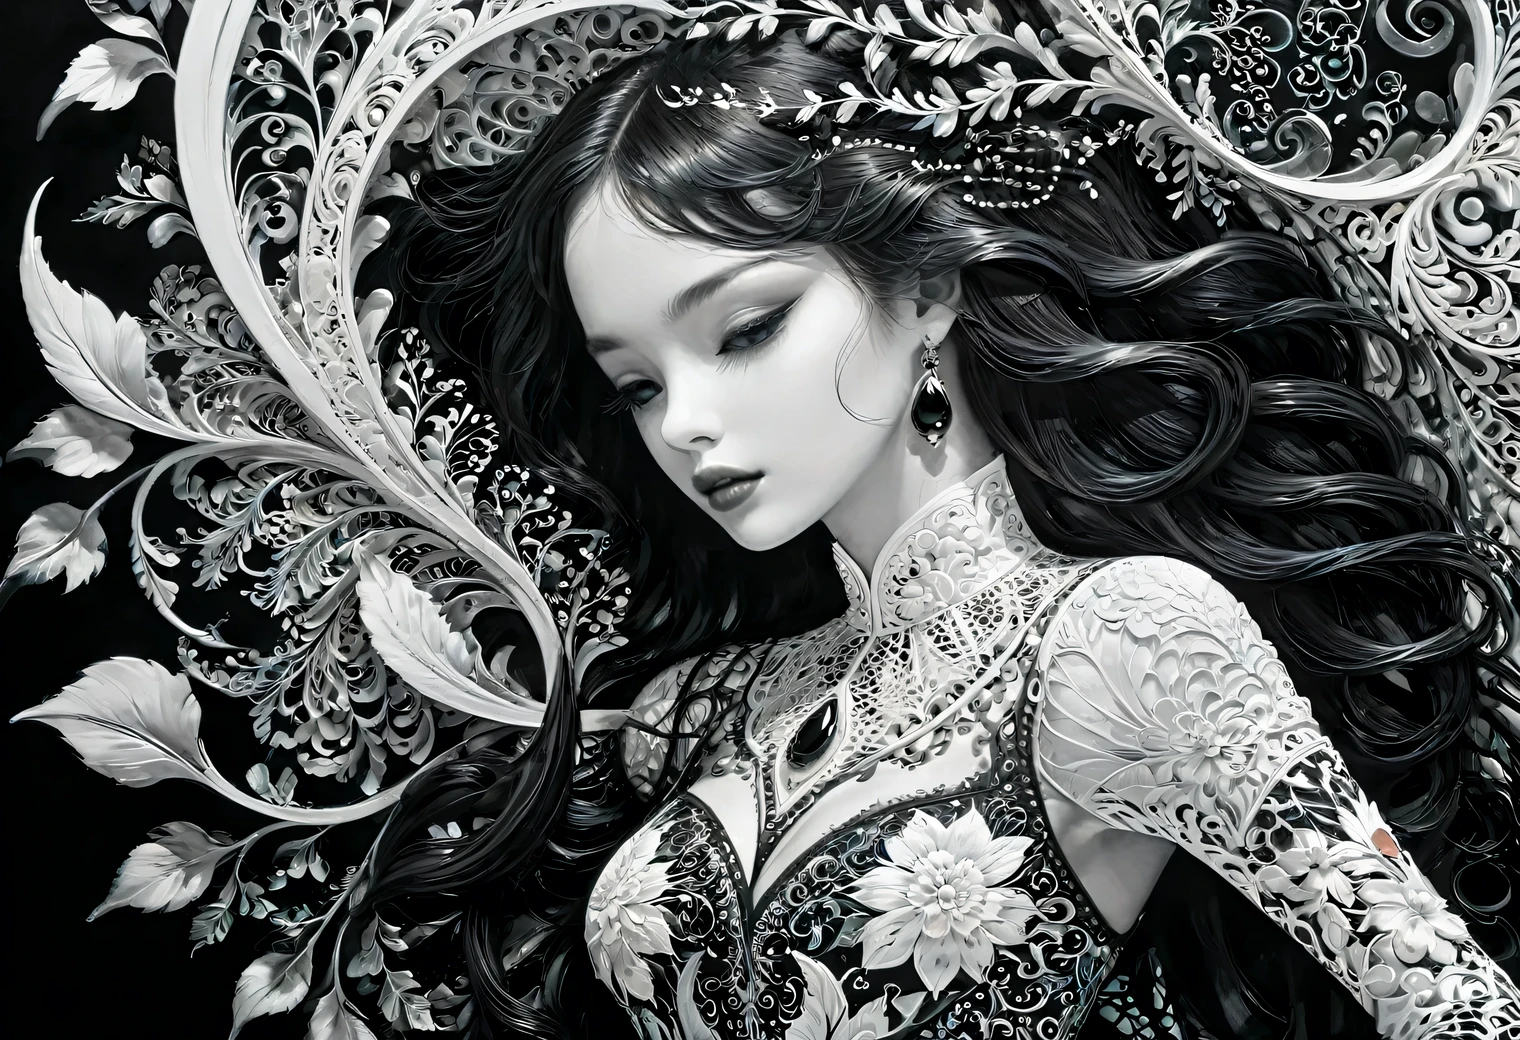 Black and White Art, black art, white art, style, grace, mesmerizing, the work of a black and white master, filigree, intricate, depth of volume, illusion in the image